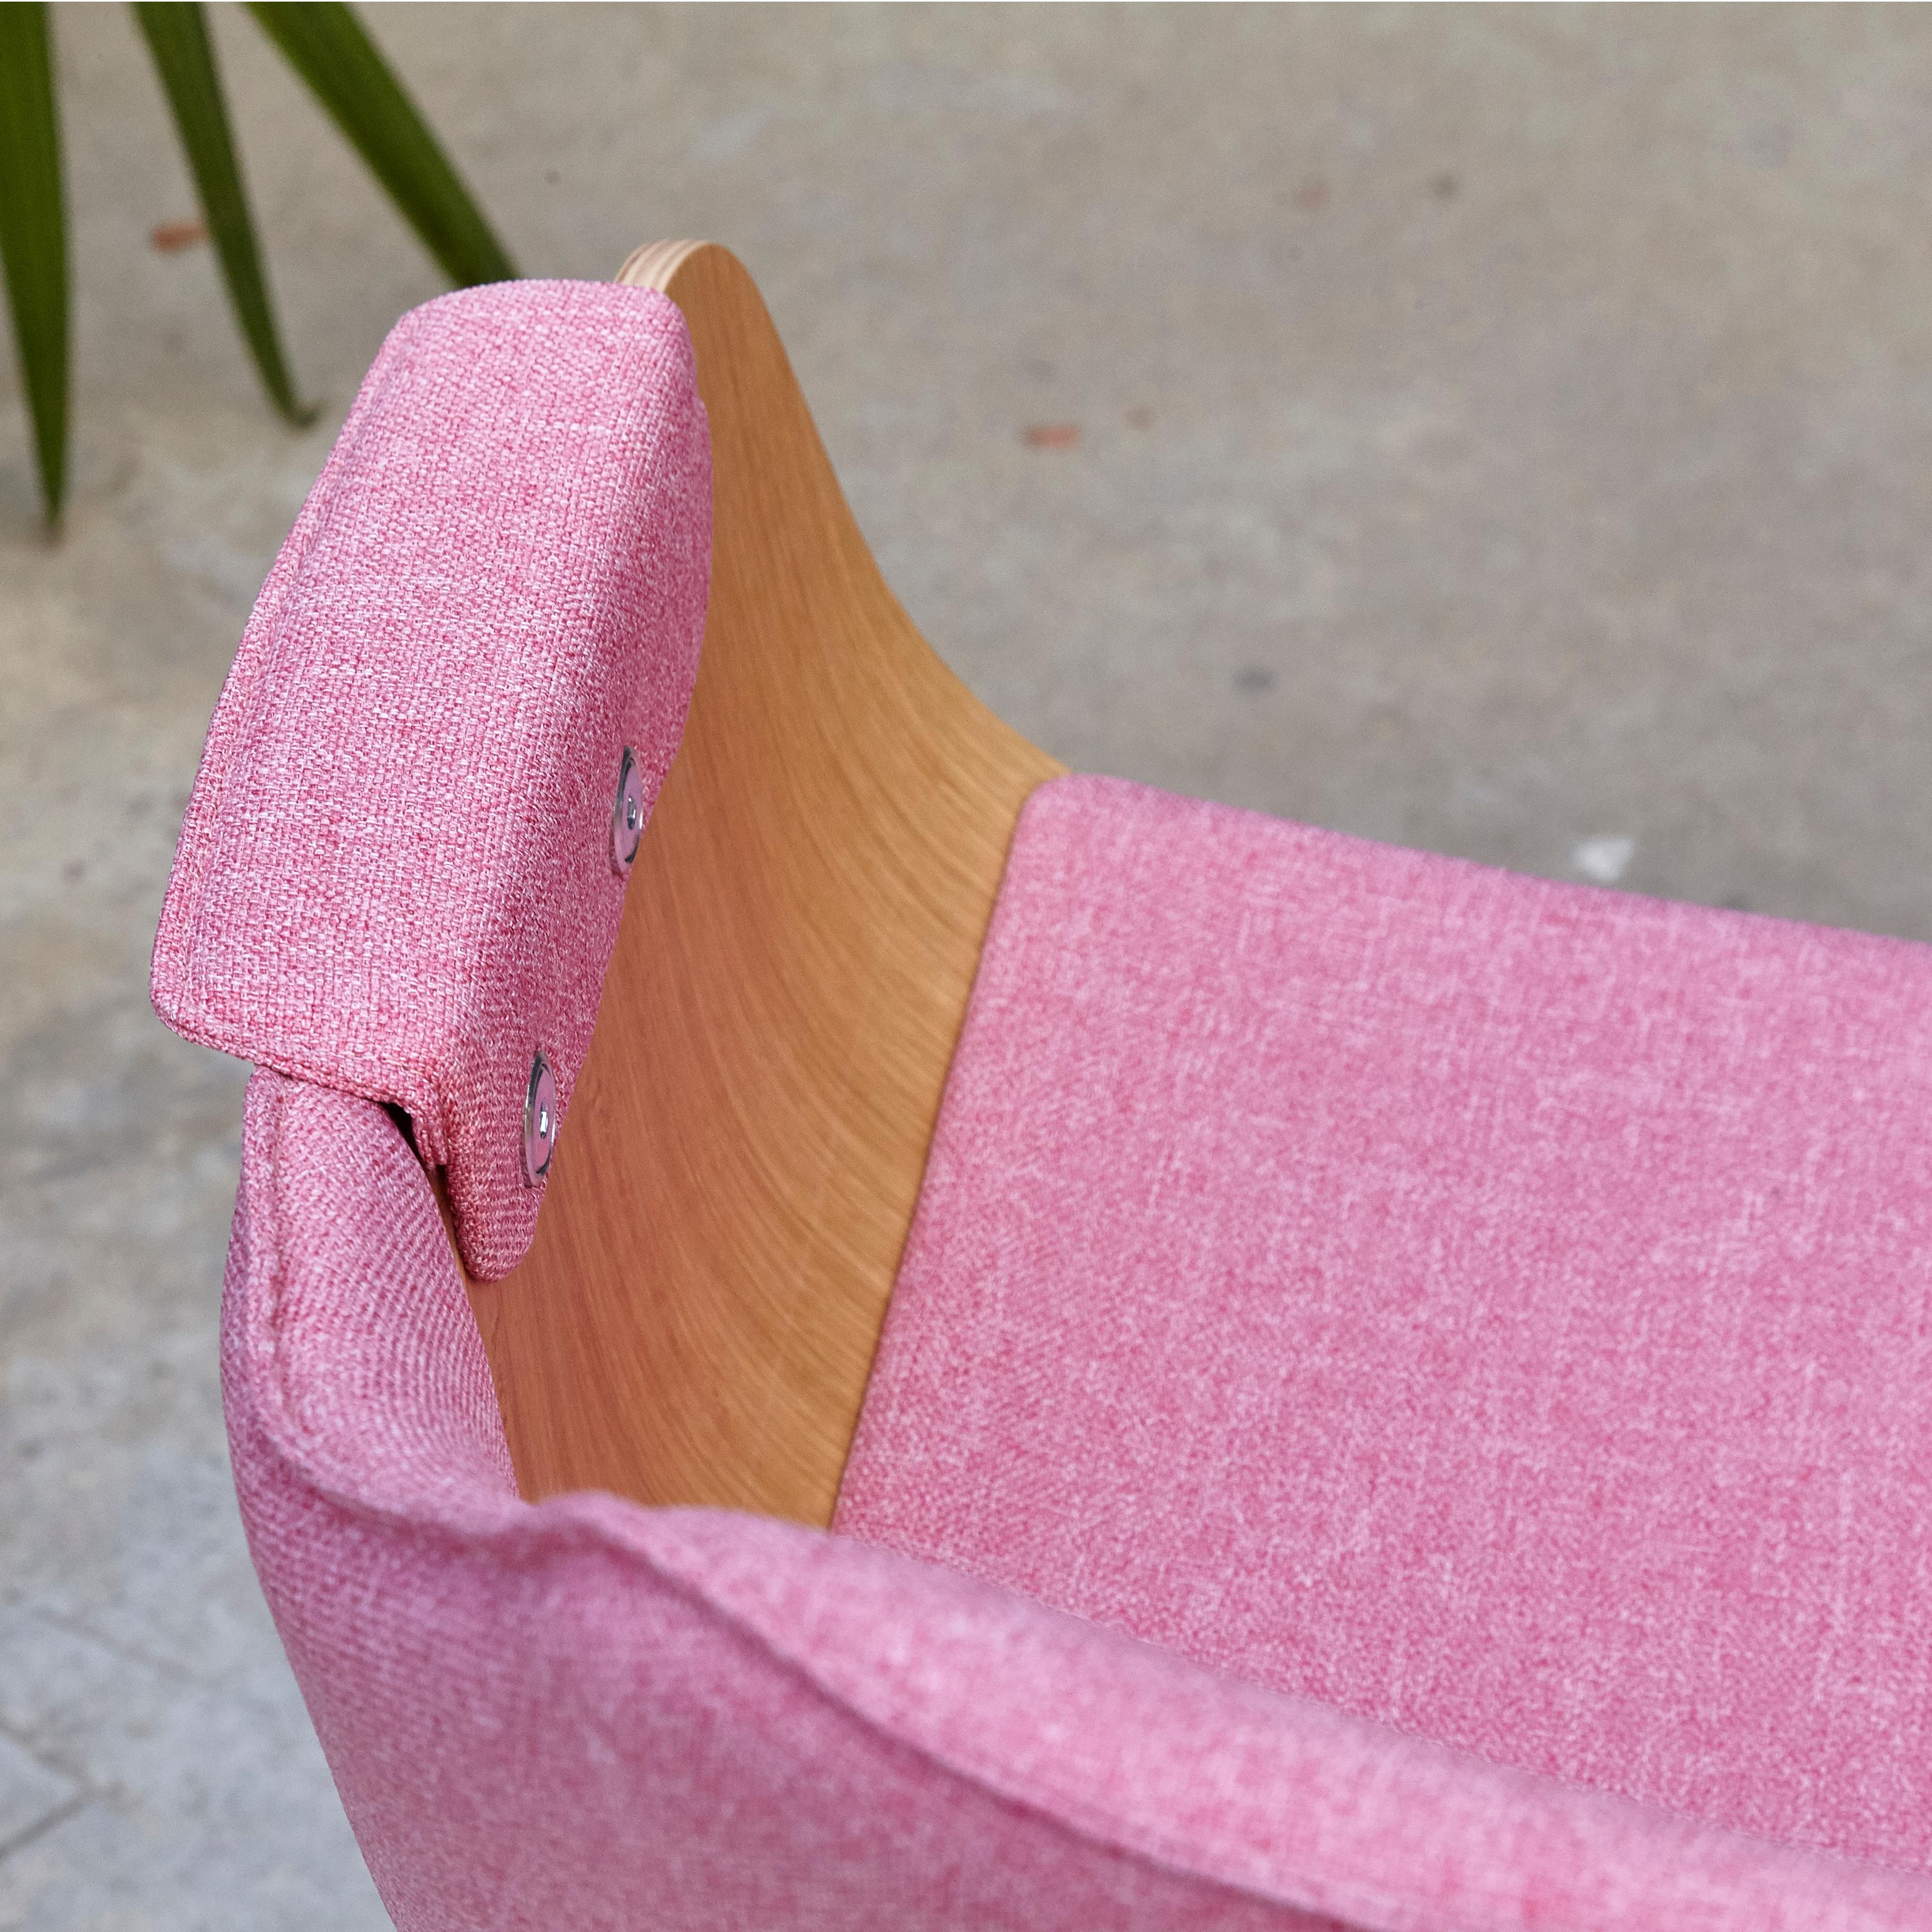 Jaime Hayon Contemporary Pink Upholstered Wood Chair Showtime by BD Barcelona 5